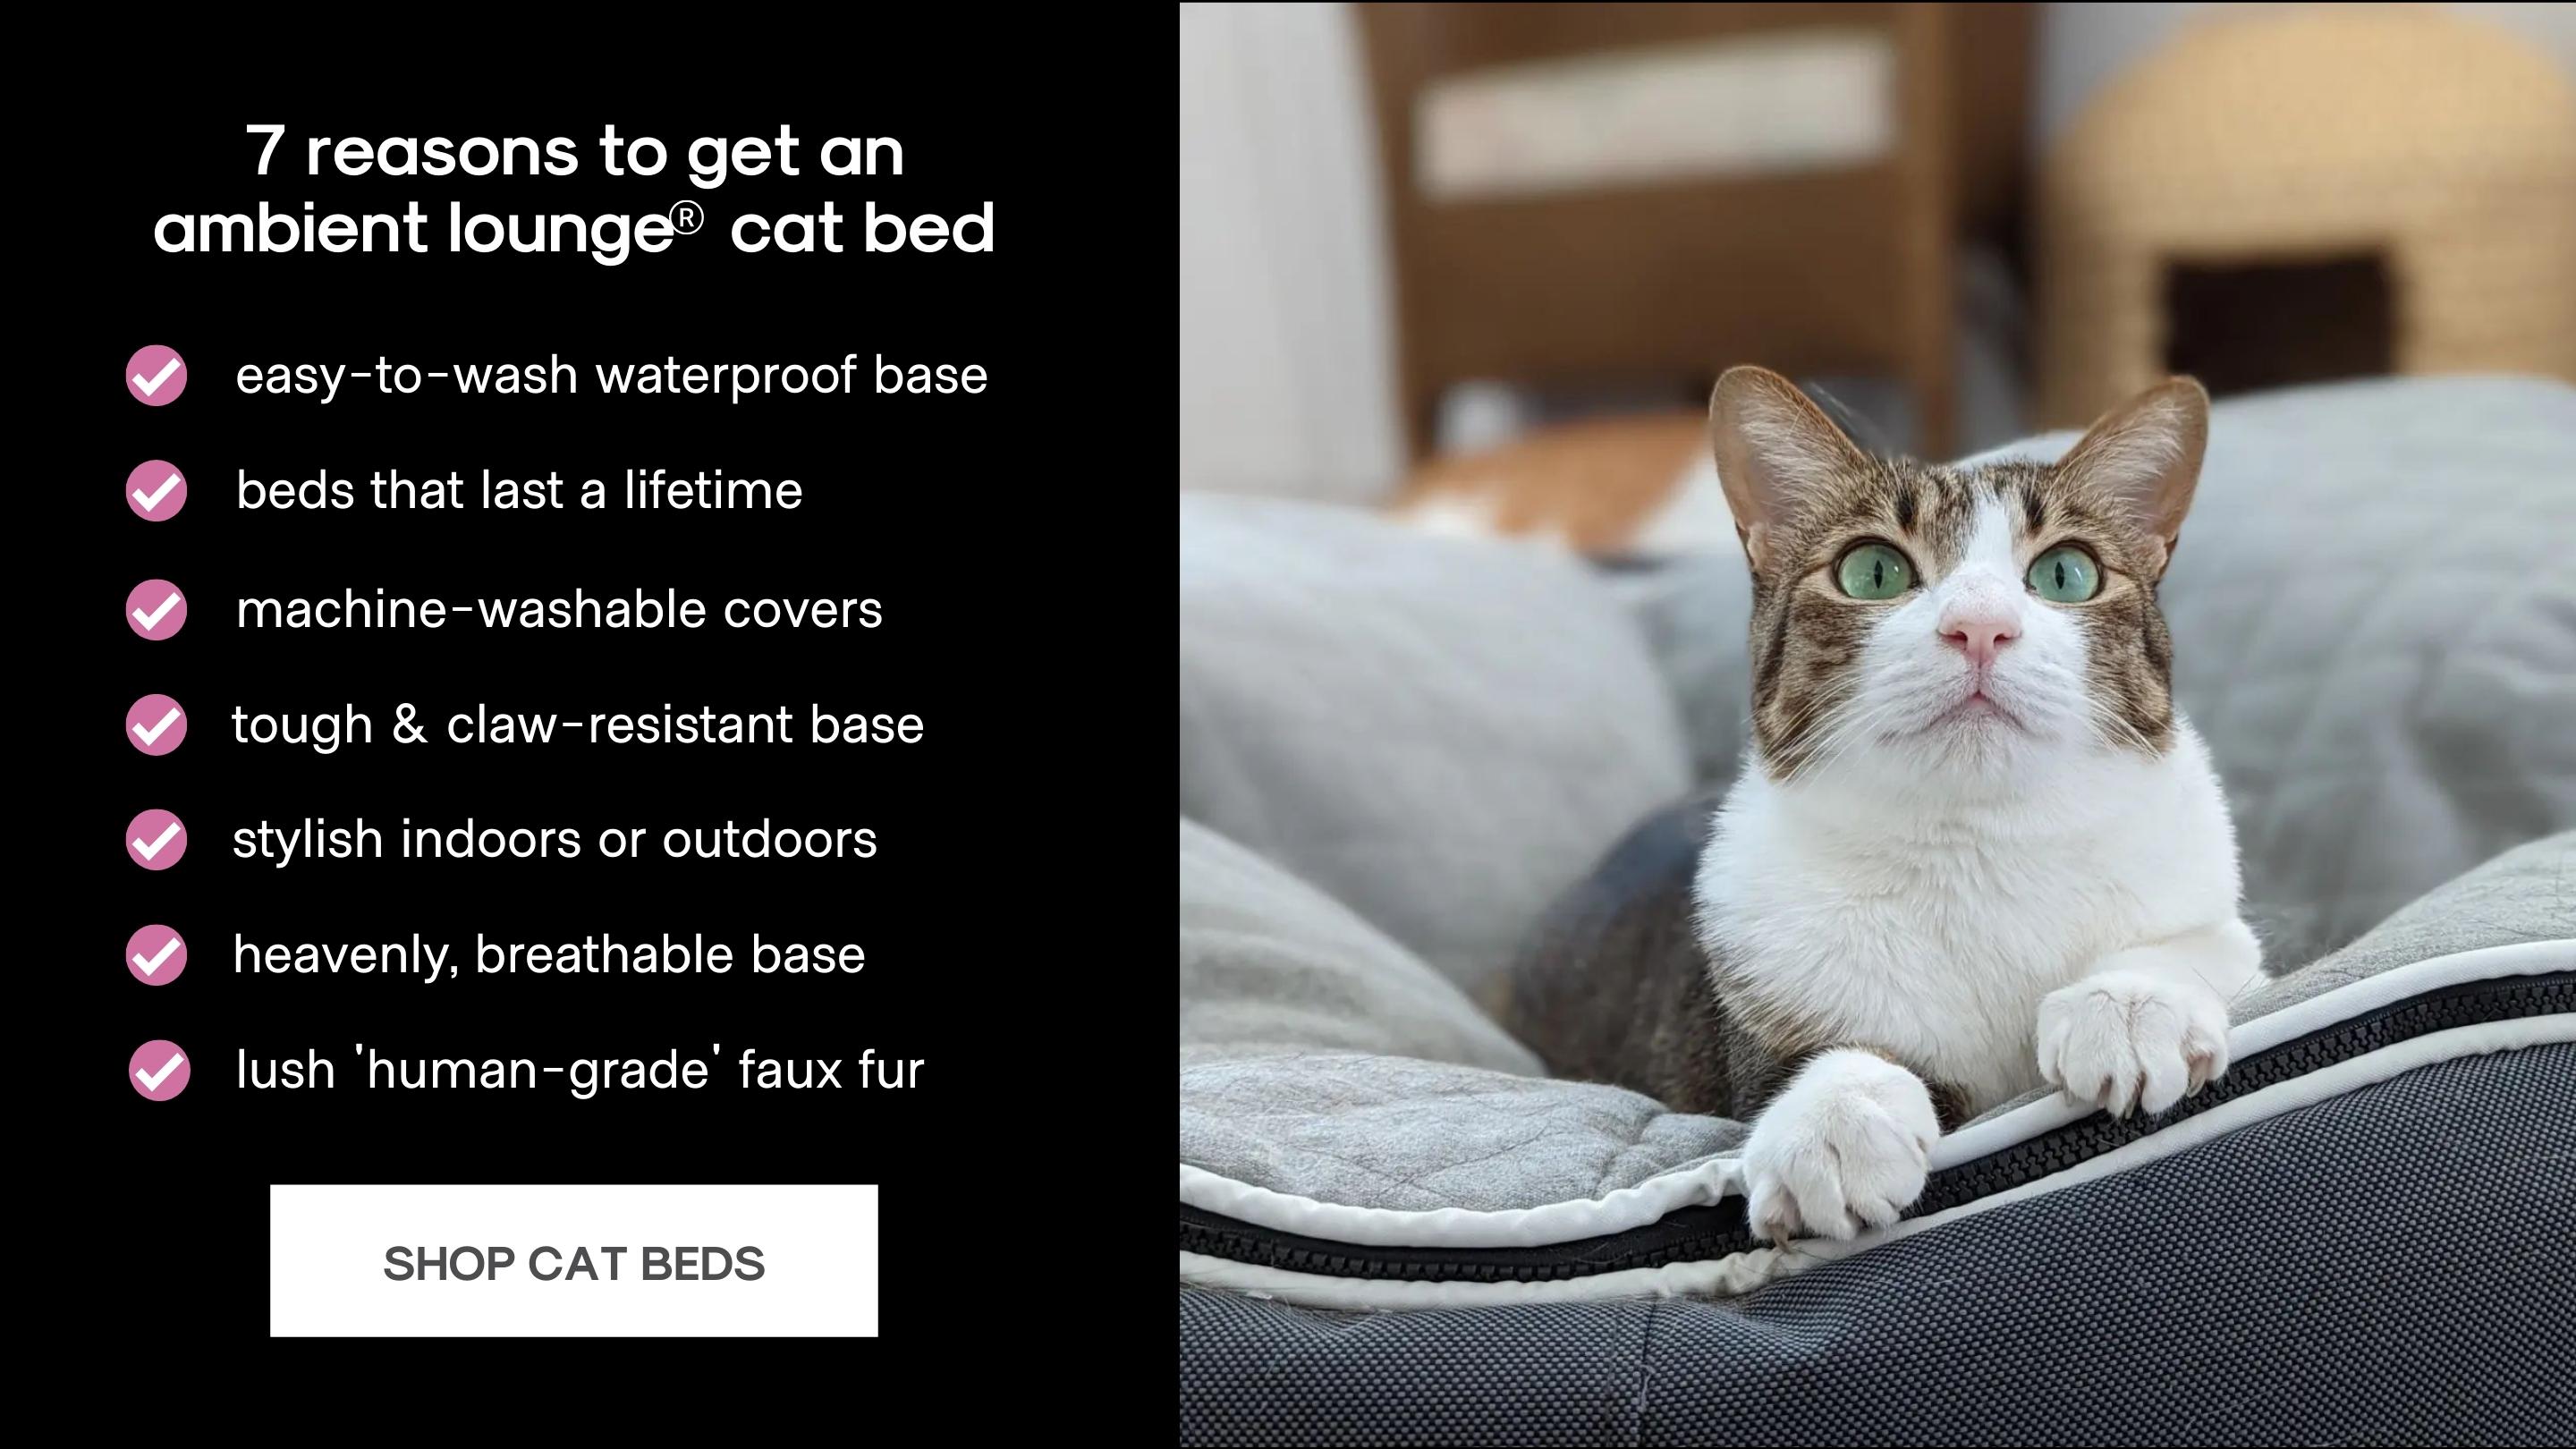 Cat beds by ambient lounge